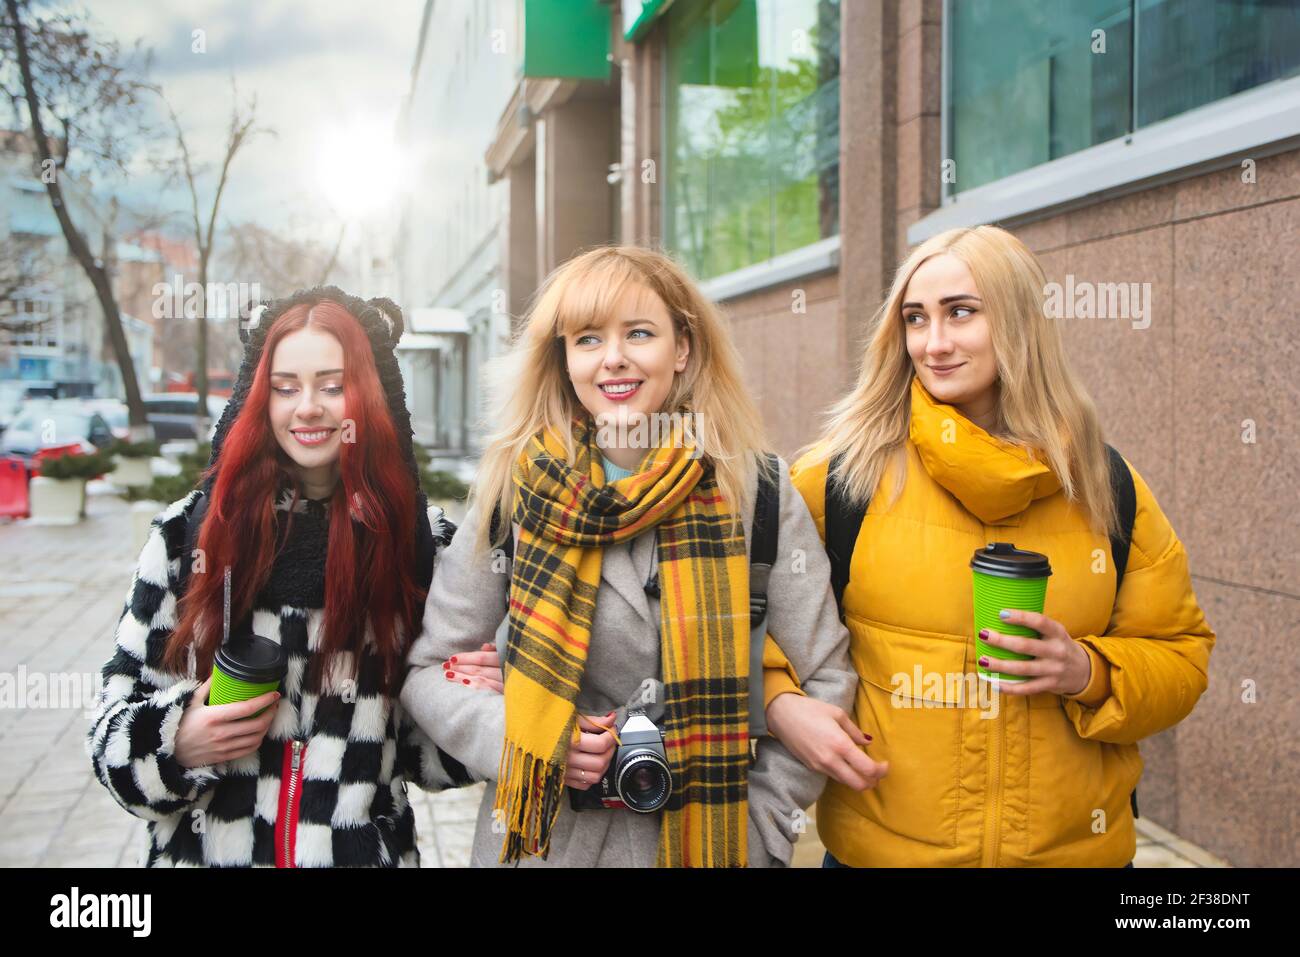 Vacation, tourism concept - three student beautiful girls walking around the city drinking coffee and and taking pictures Stock Photo